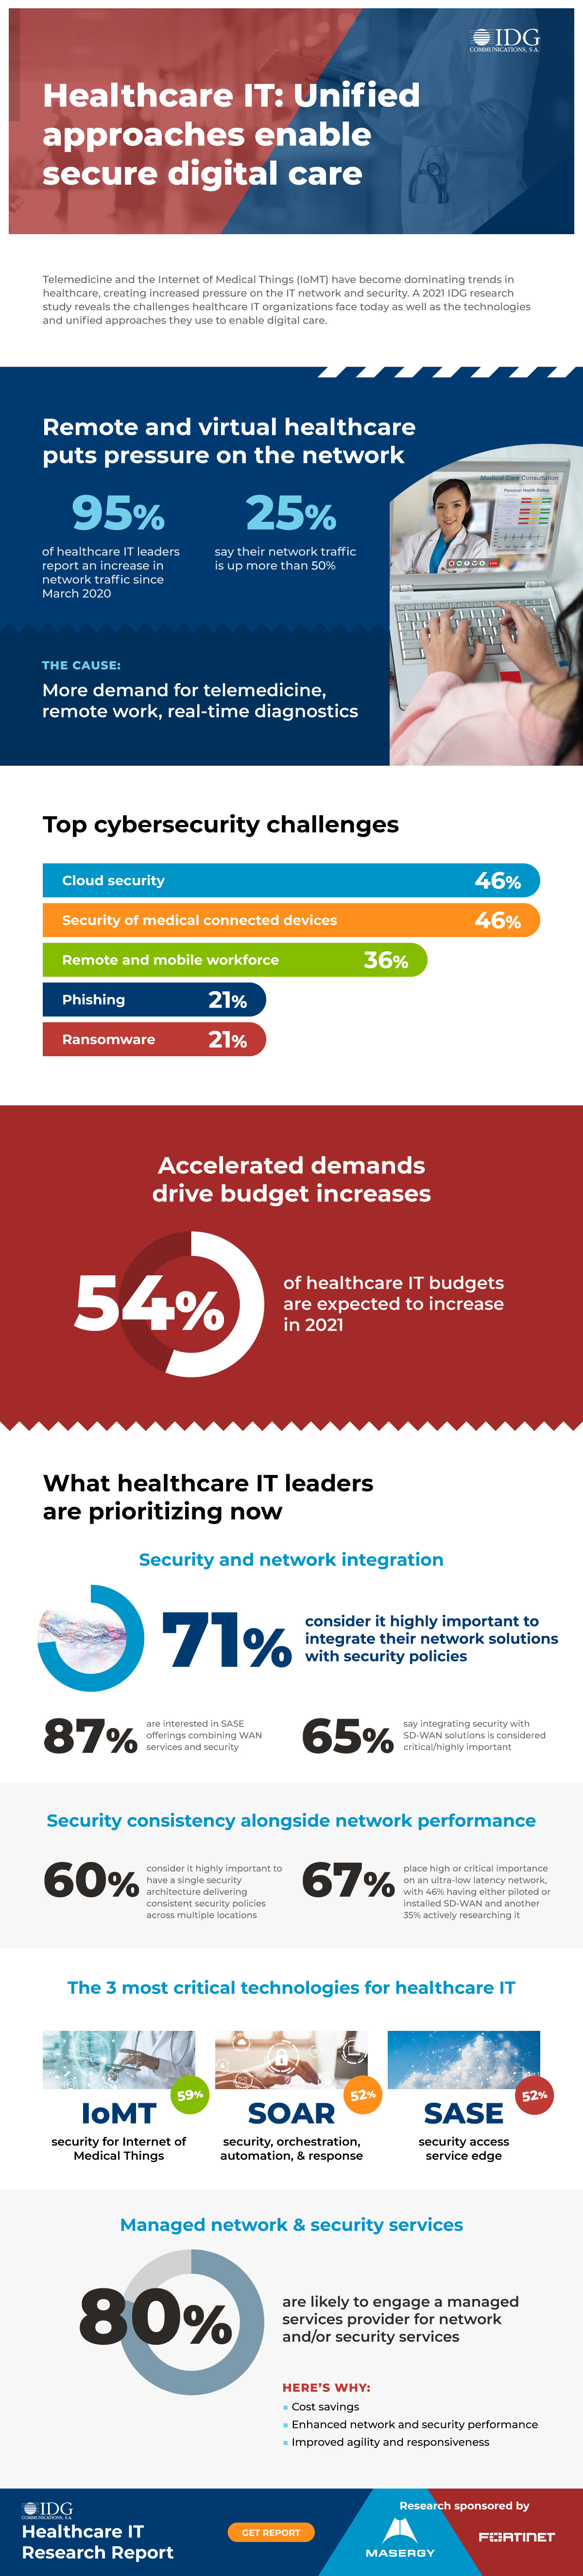 Infographic: Healthcare IT: Unified approaches enable secure digital care